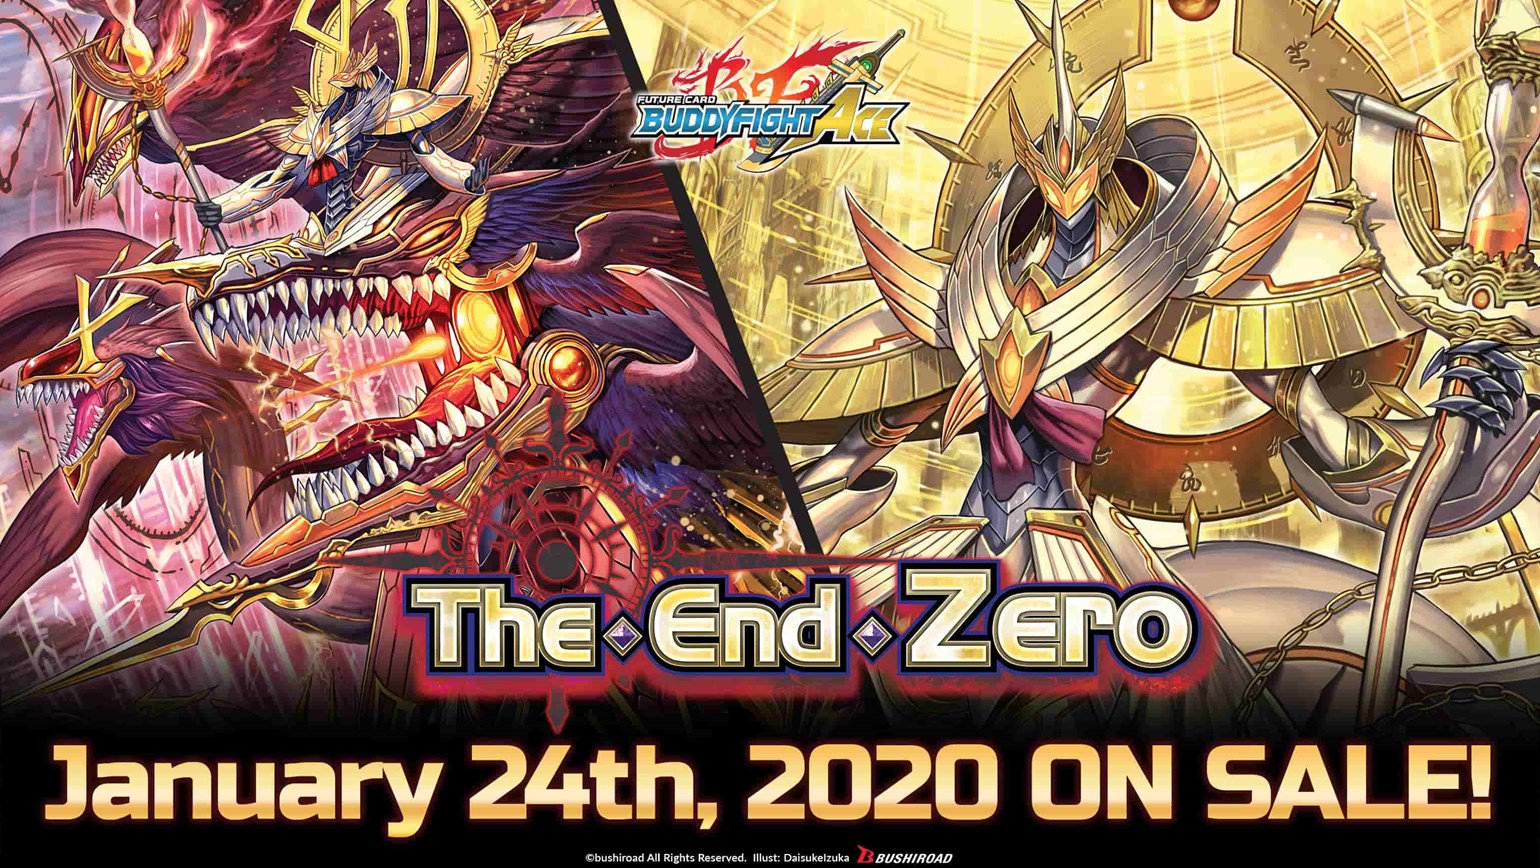 Future Card Buddyfight Ace Special Series Vol. 3 The End Zero Coming January 24th